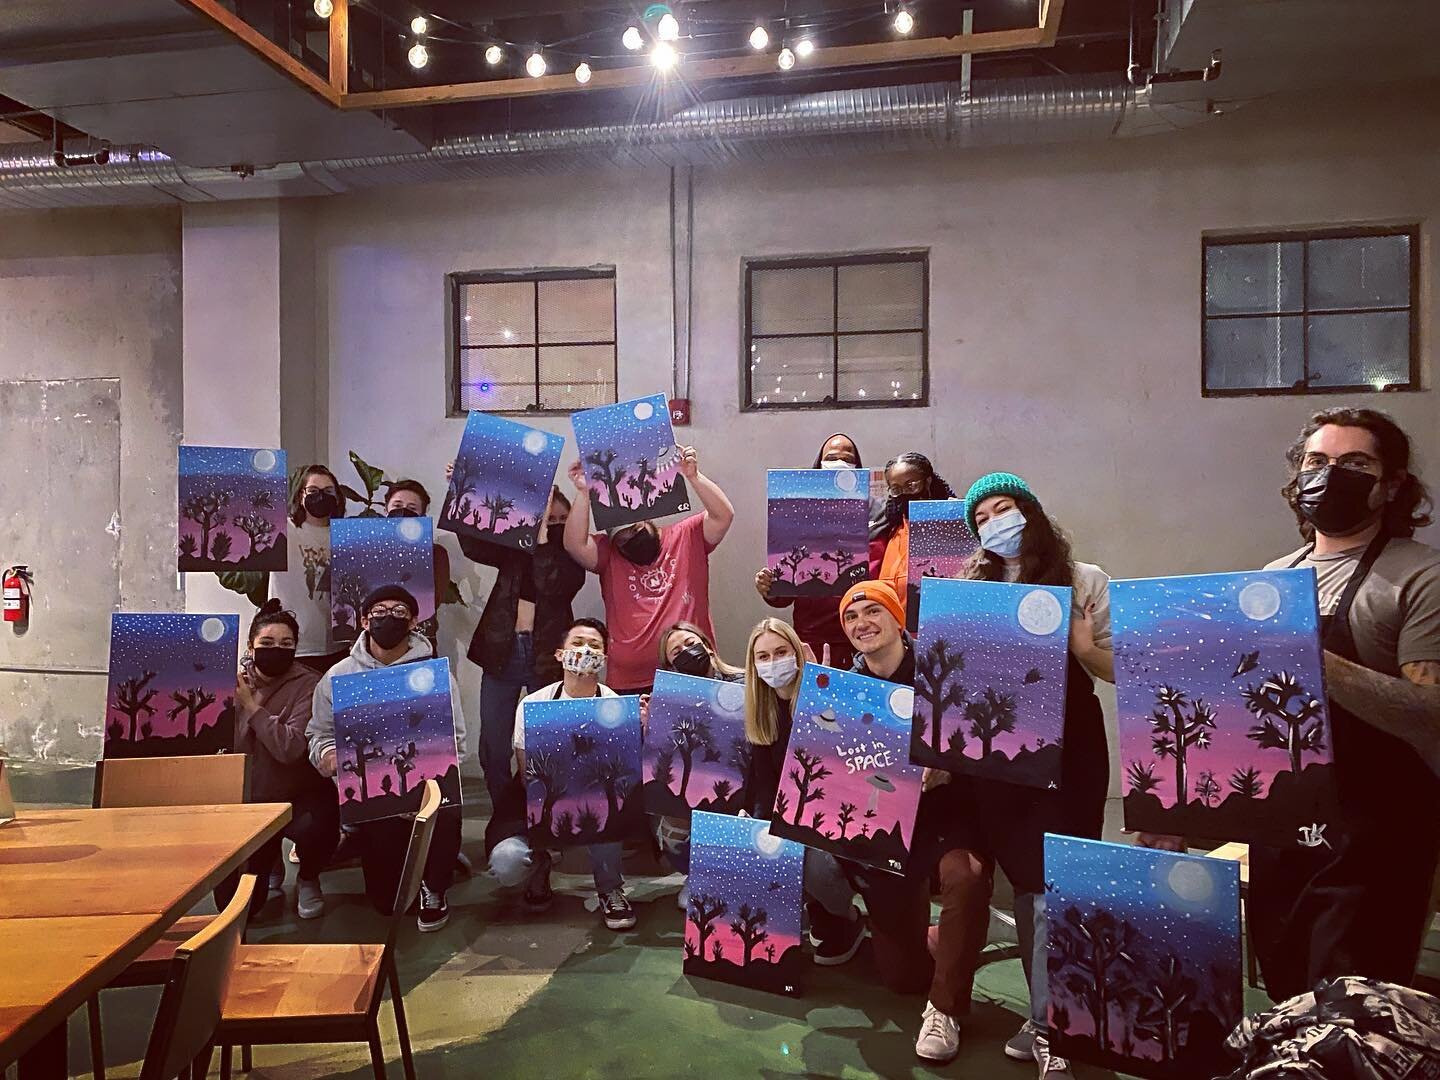 Our first event at @trademarkbrewing last night!! We had so much fun painting and sipping delicious beer with all of you! What a beautiful place, we already can&rsquo;t wait to come back! #bestofla #bestoflosangeles #brushstrokesandbevs #brushstrokes